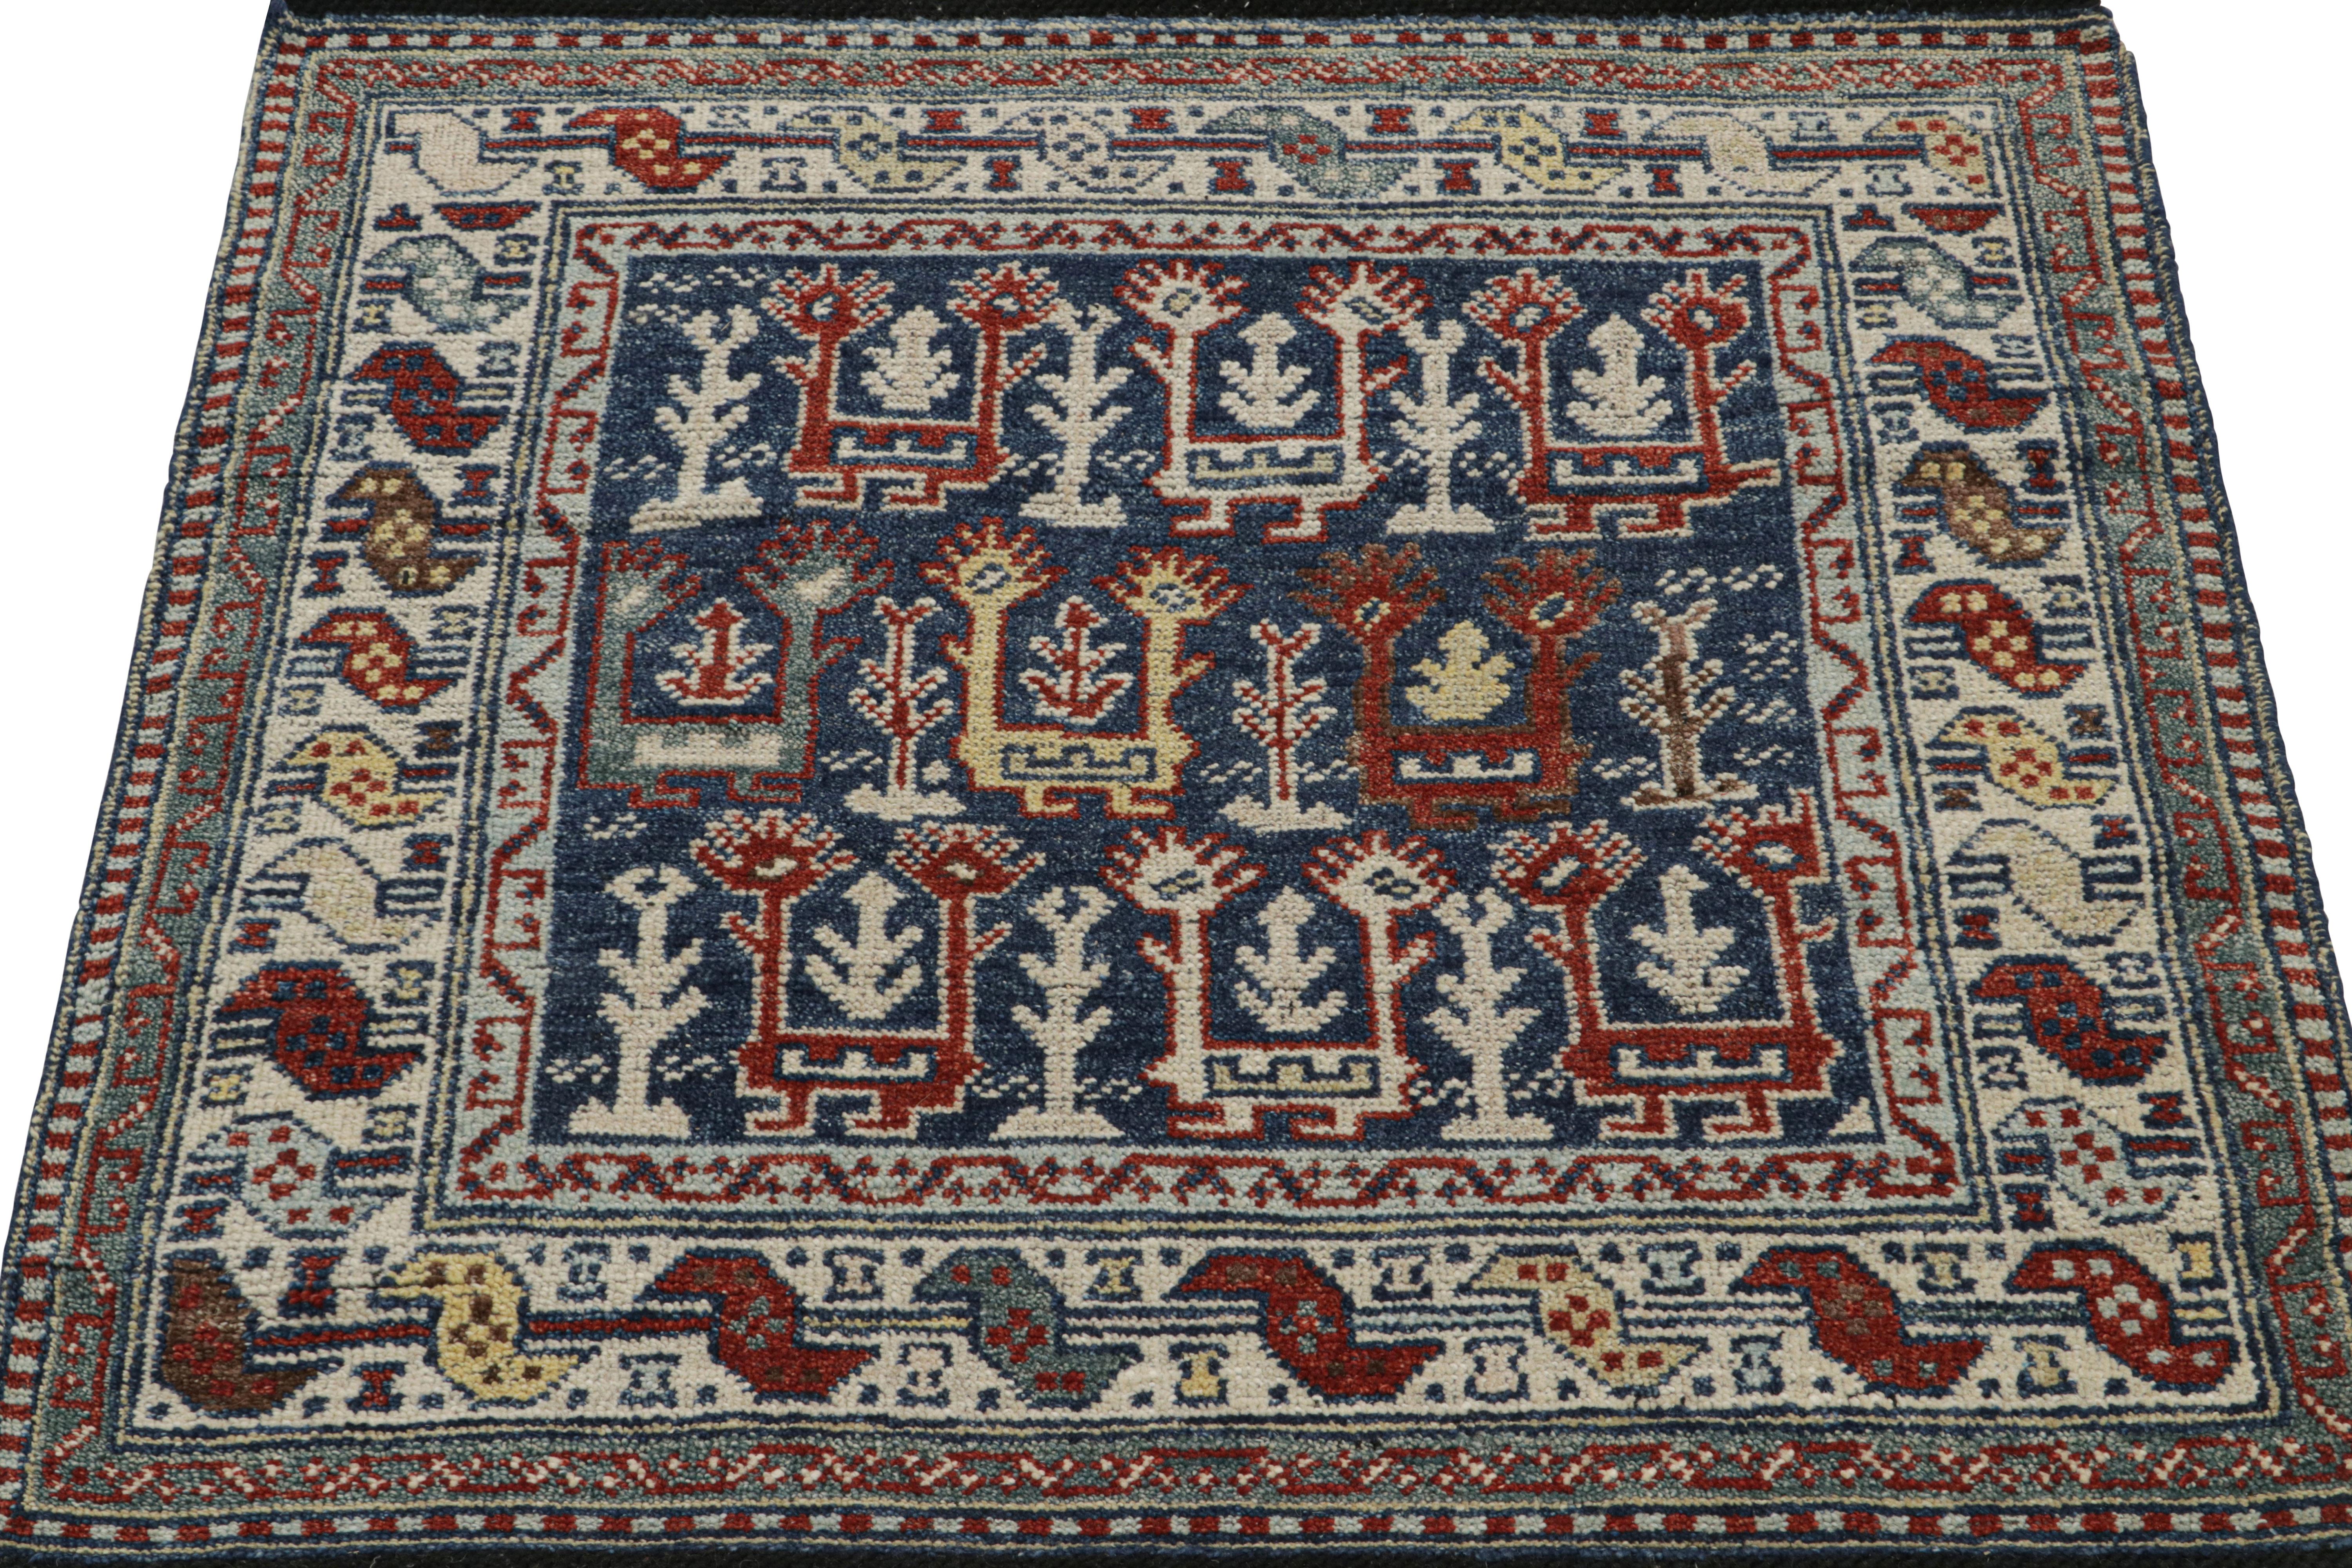 Indian Rug & Kilim’s Blue Tribal Style Square Rug with Primitivist Geometric Patterns For Sale